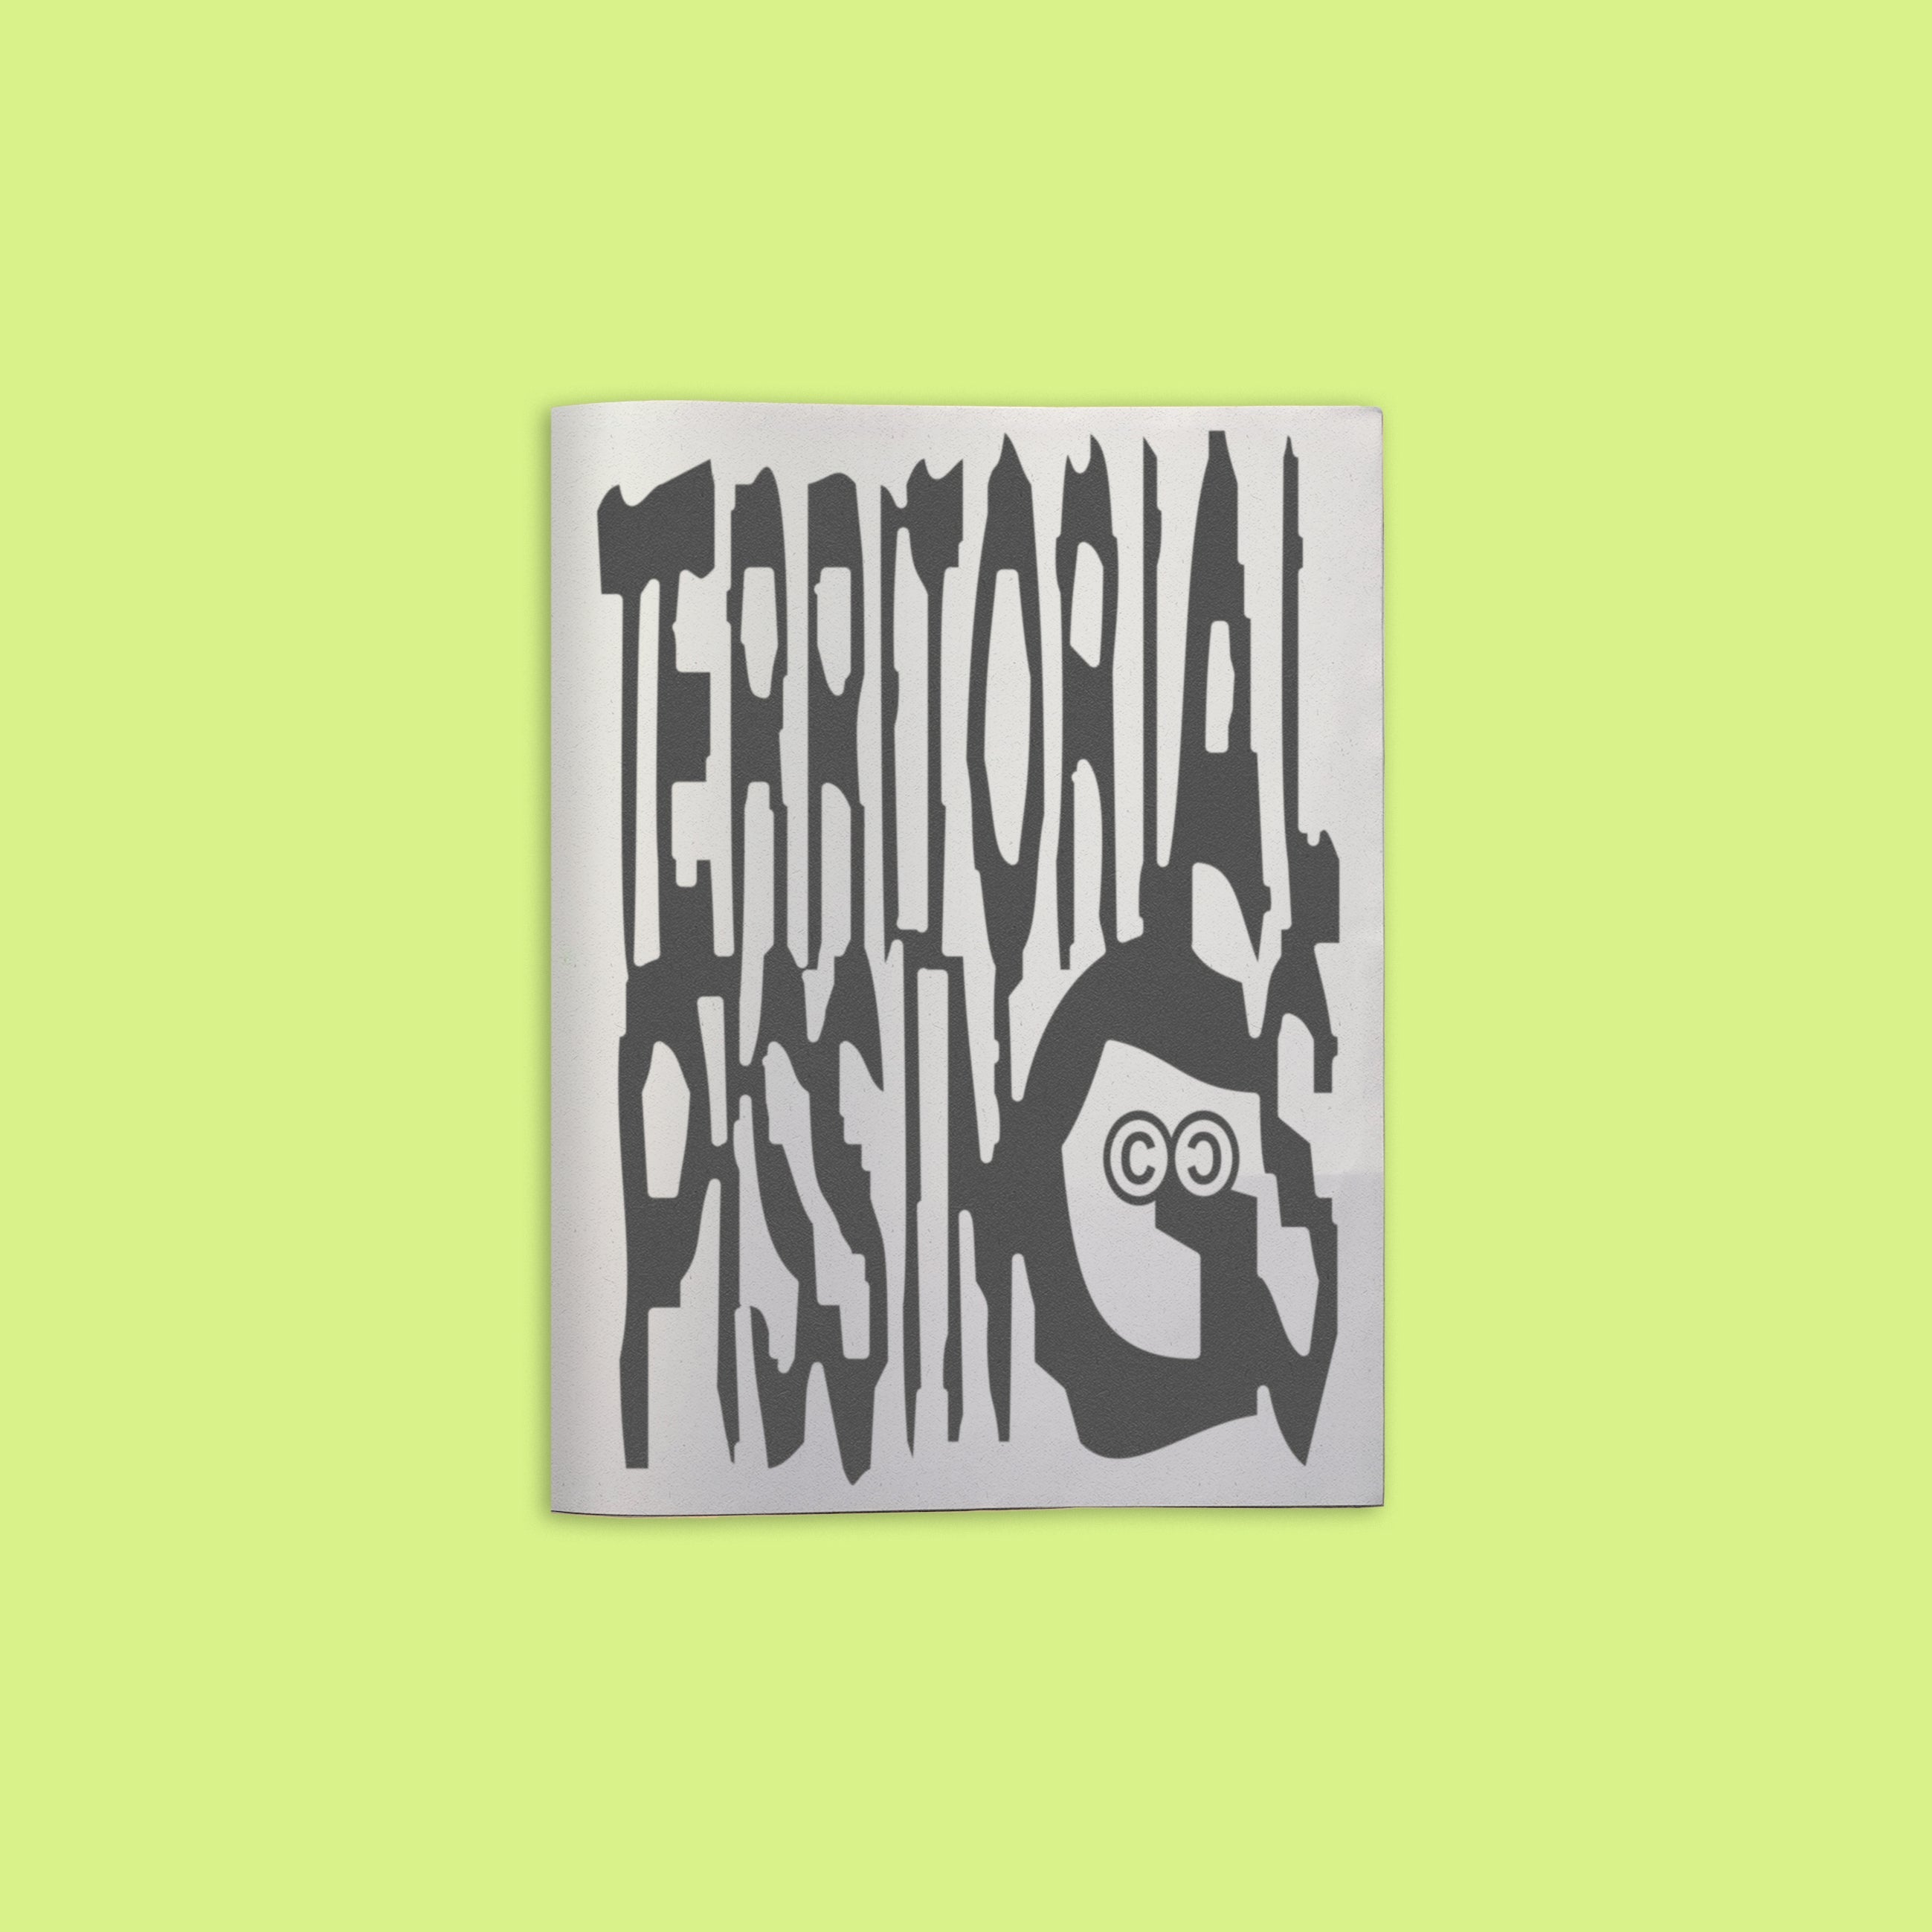 TERRITORIAL PISSING ZINE by STEWART ARMSTRONG: SHELTER BOOK CLUB